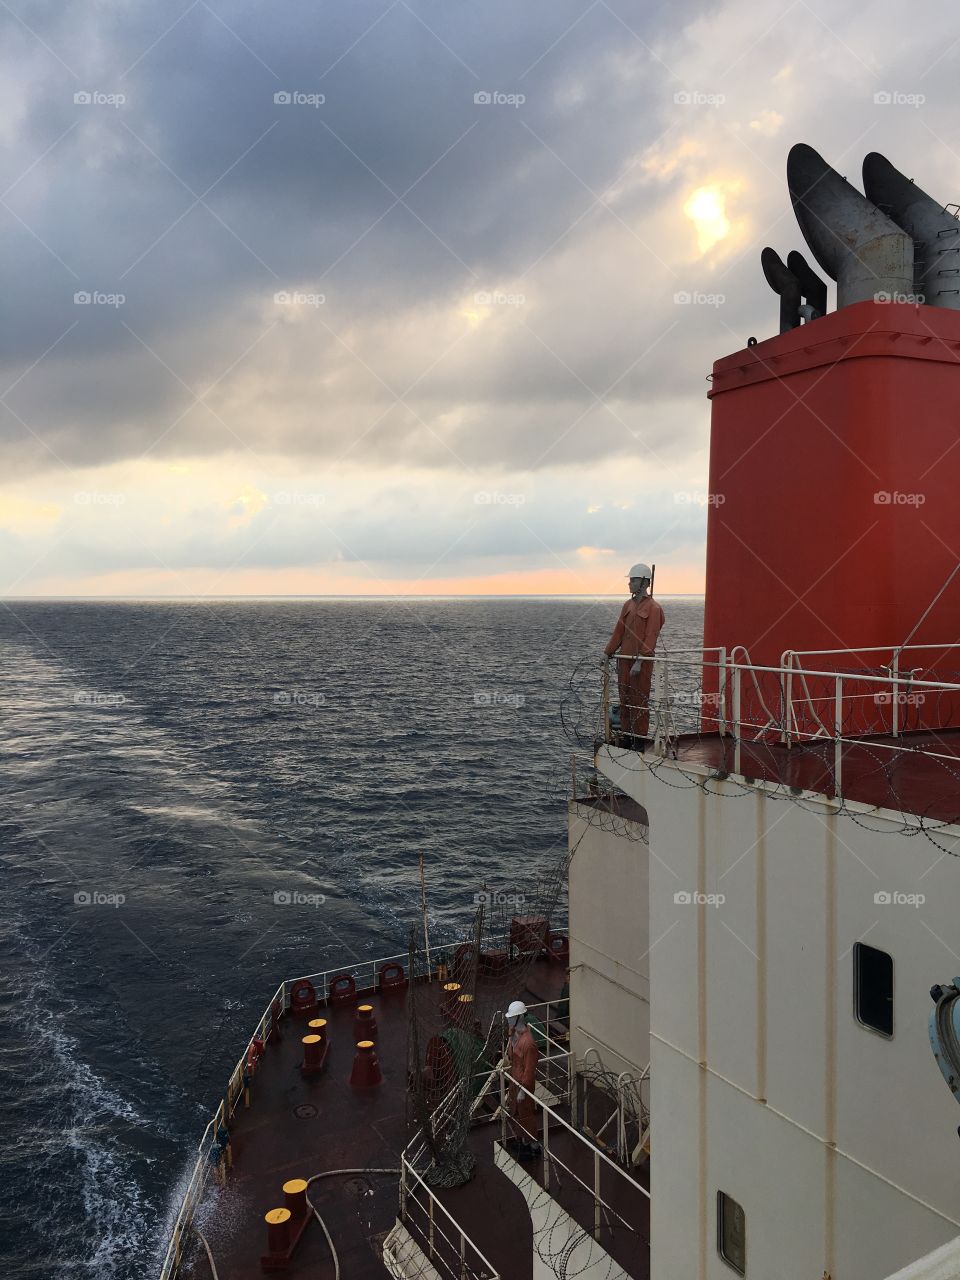 This photo was taken while we transit at the International Recommended Transit Corridor (IRTC) in Gulf of Aden between the sea of Somalia and Yemen. Dummies and razor wires are installed to merchant ships to deter Pirates from boarding the ship.